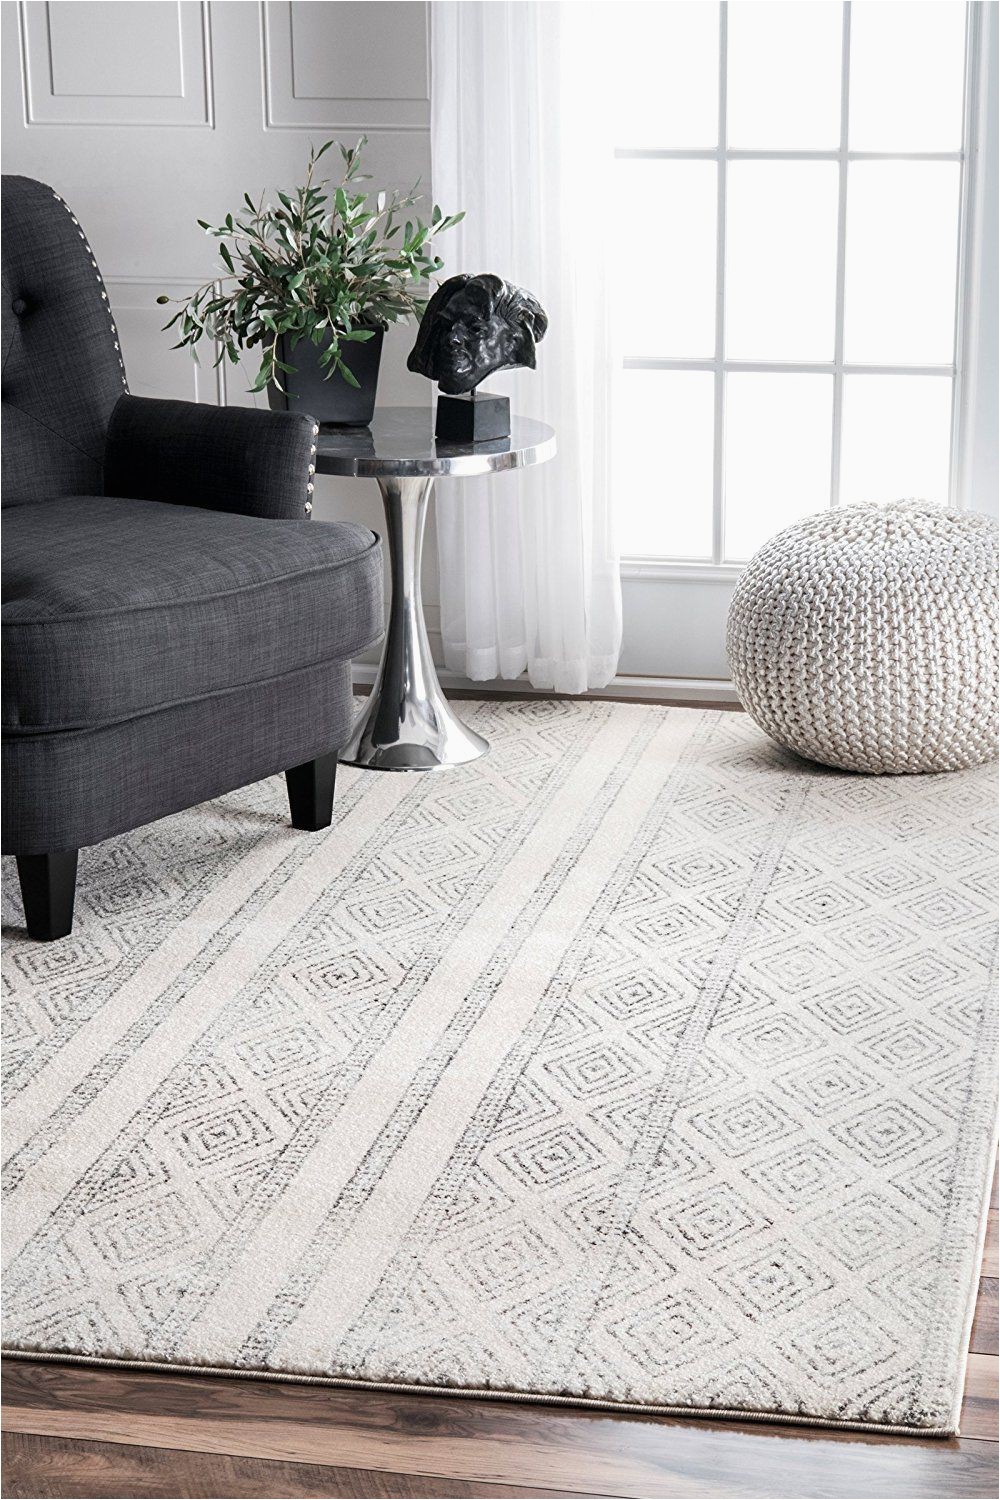 Grey area Rug Living Room Helpful Tips to Help You Find the Perfect Farmhouse Style